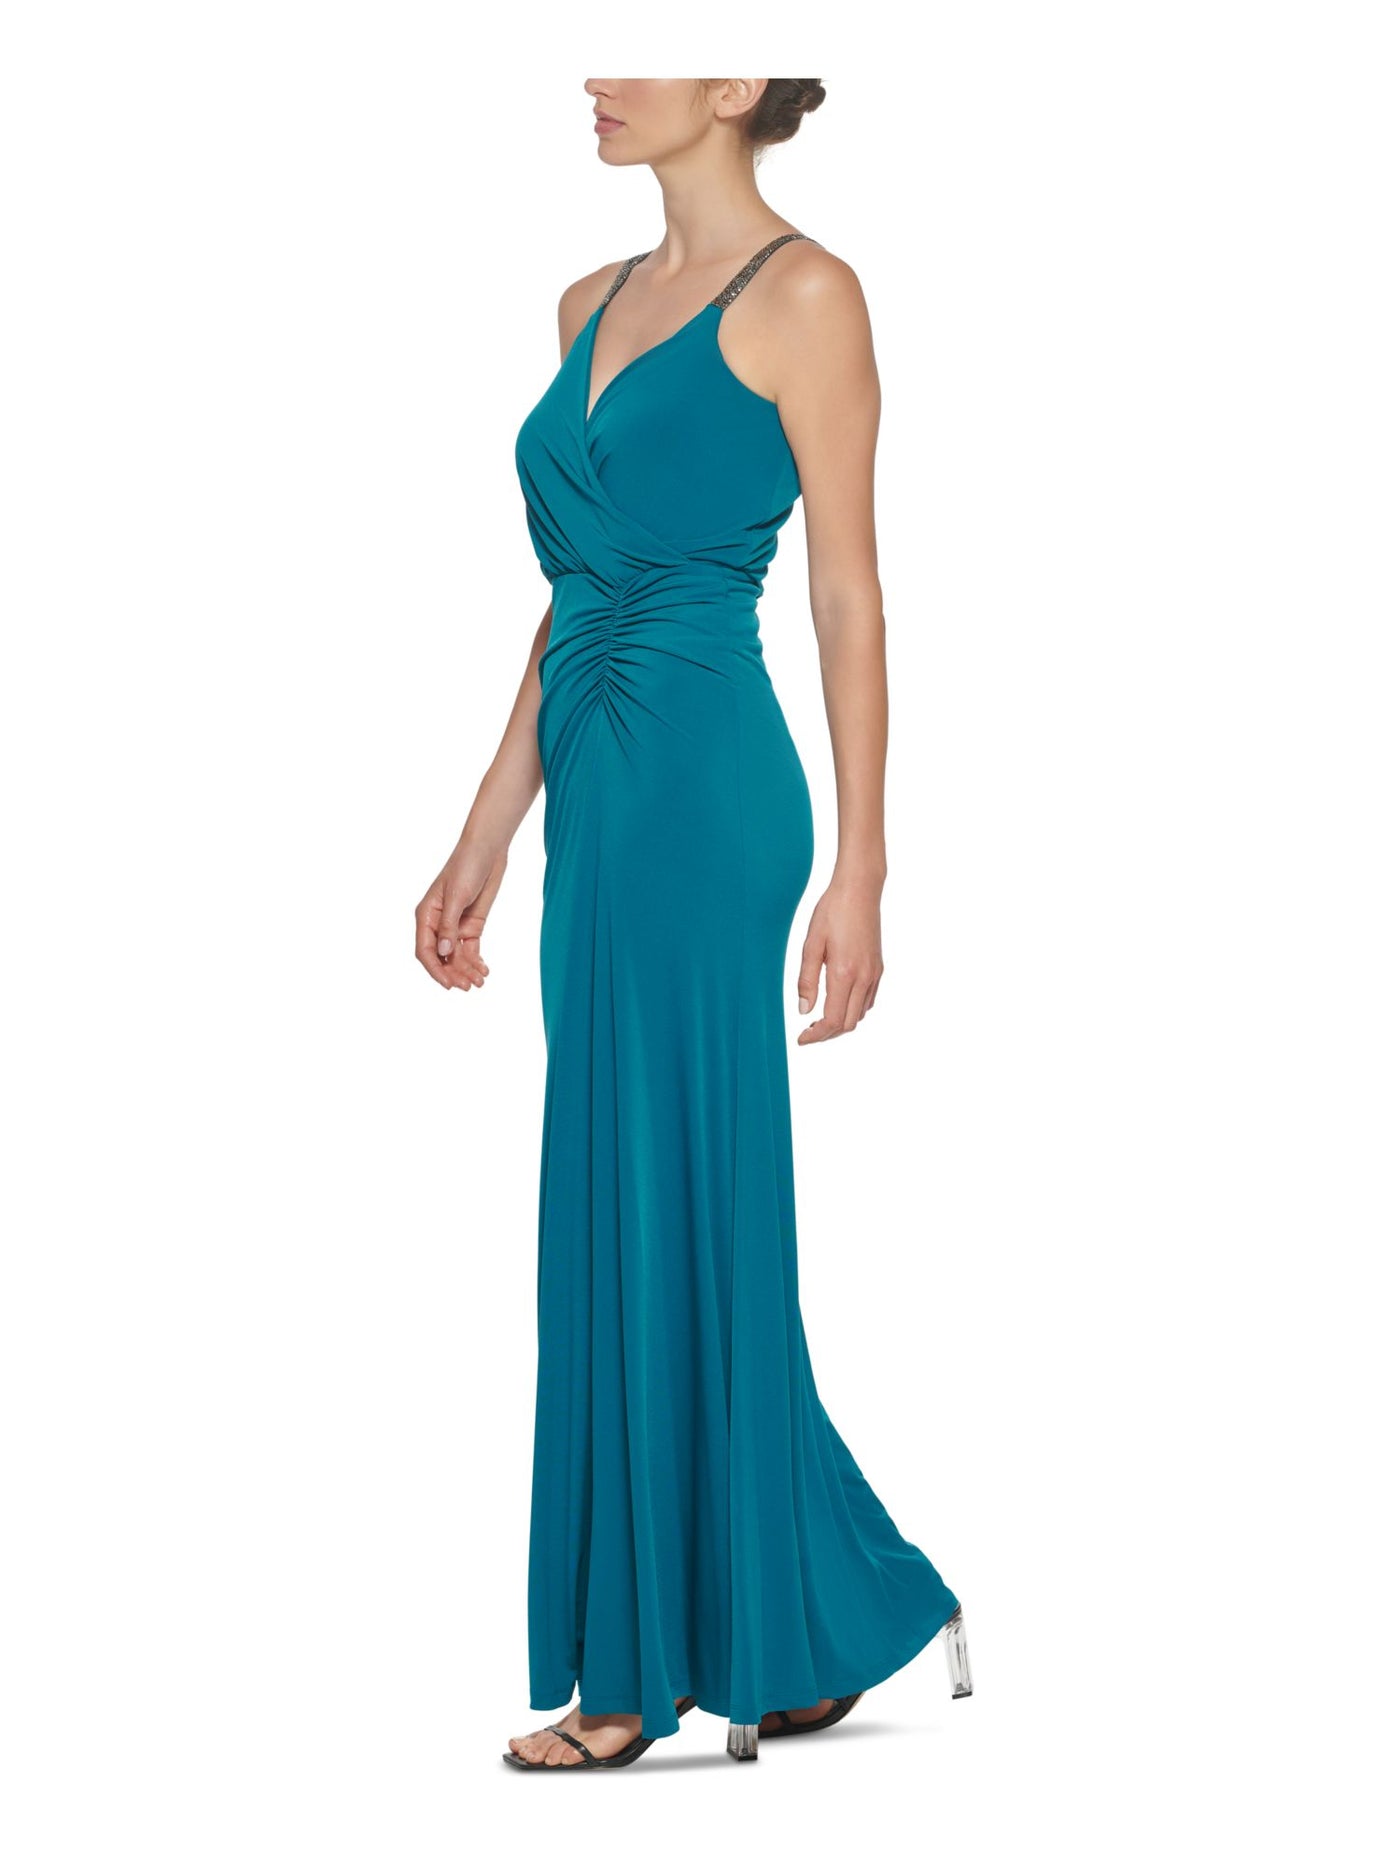 CALVIN KLEIN Womens Teal Stretch Ruched Zippered Embellished Straps Jersey-knit Spaghetti Strap Surplice Neckline Full-Length Cocktail Gown Dress 12